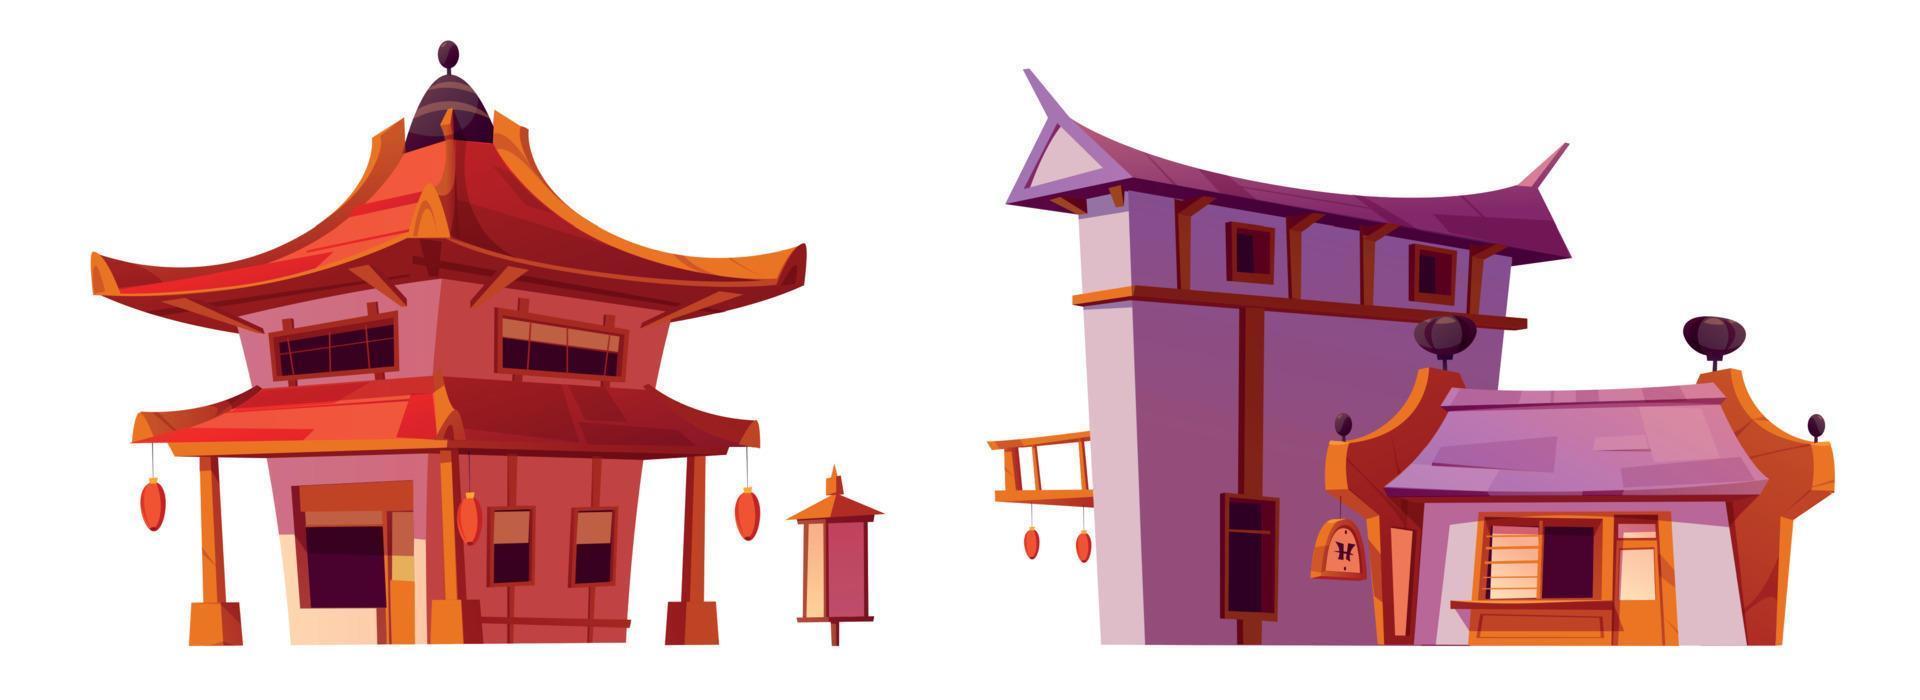 Cartoon set of Chinese houses or shops on white vector